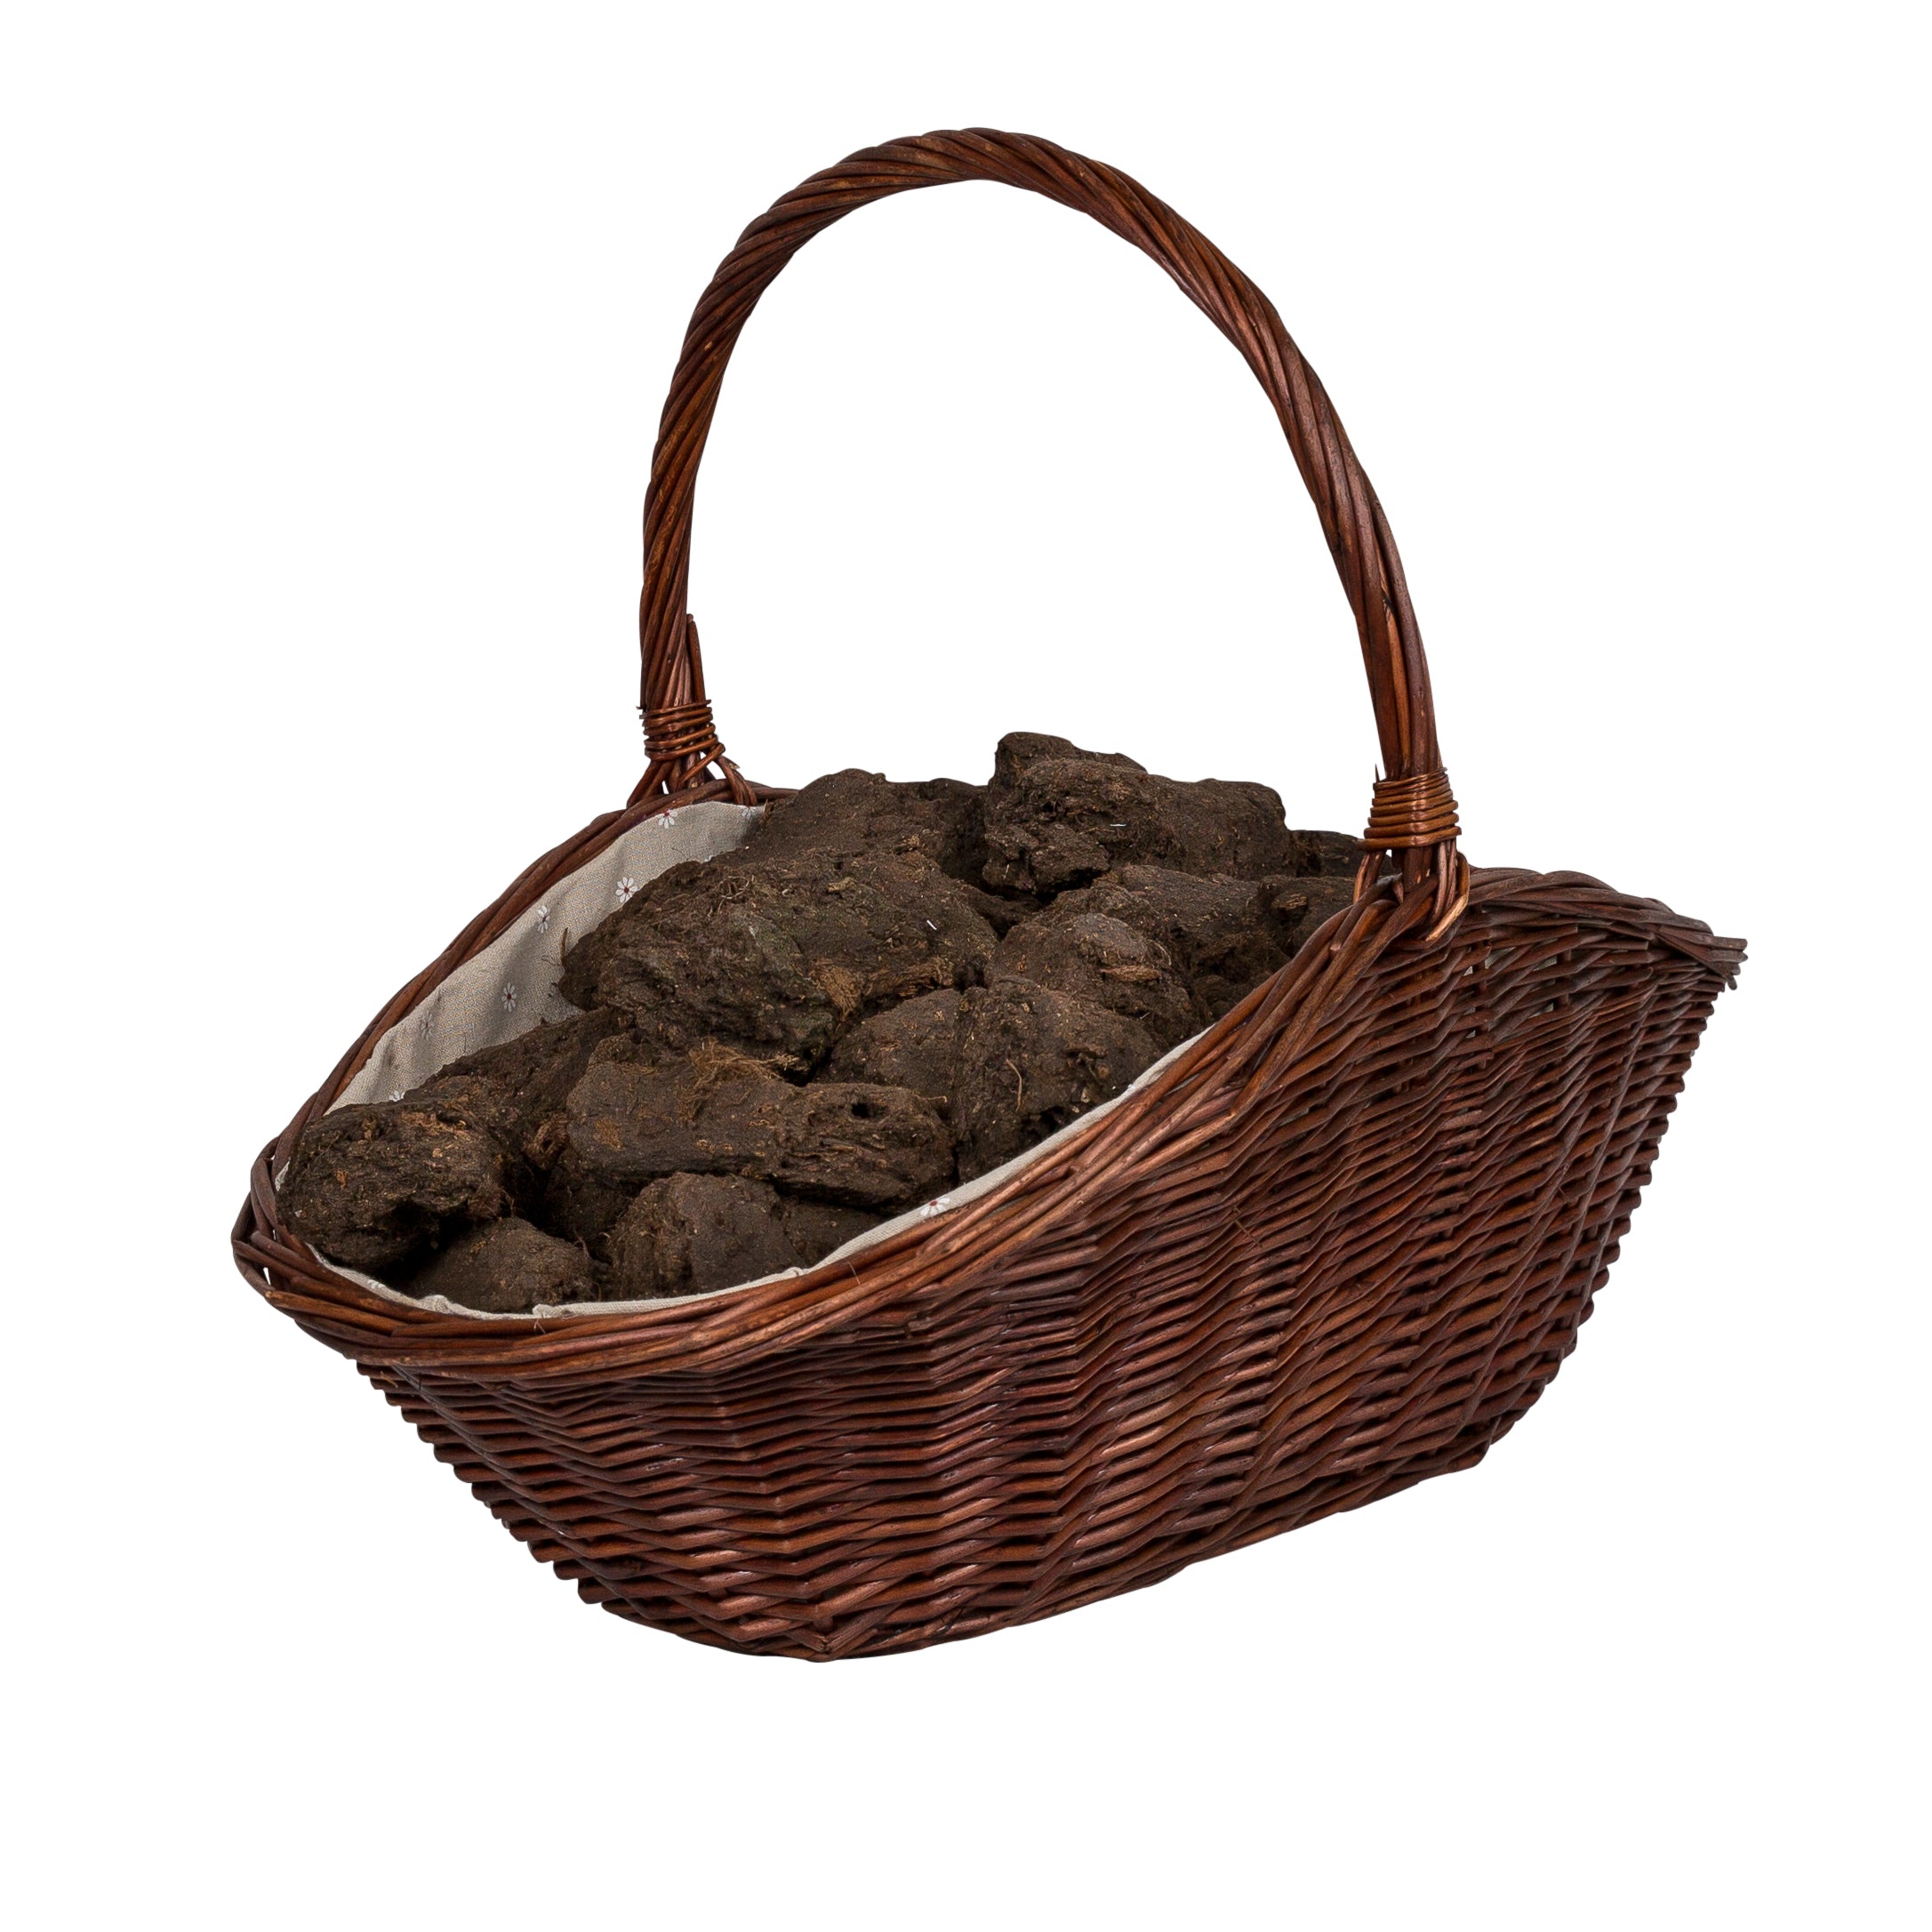 Image of Wicker basket holding turf peat briquettes